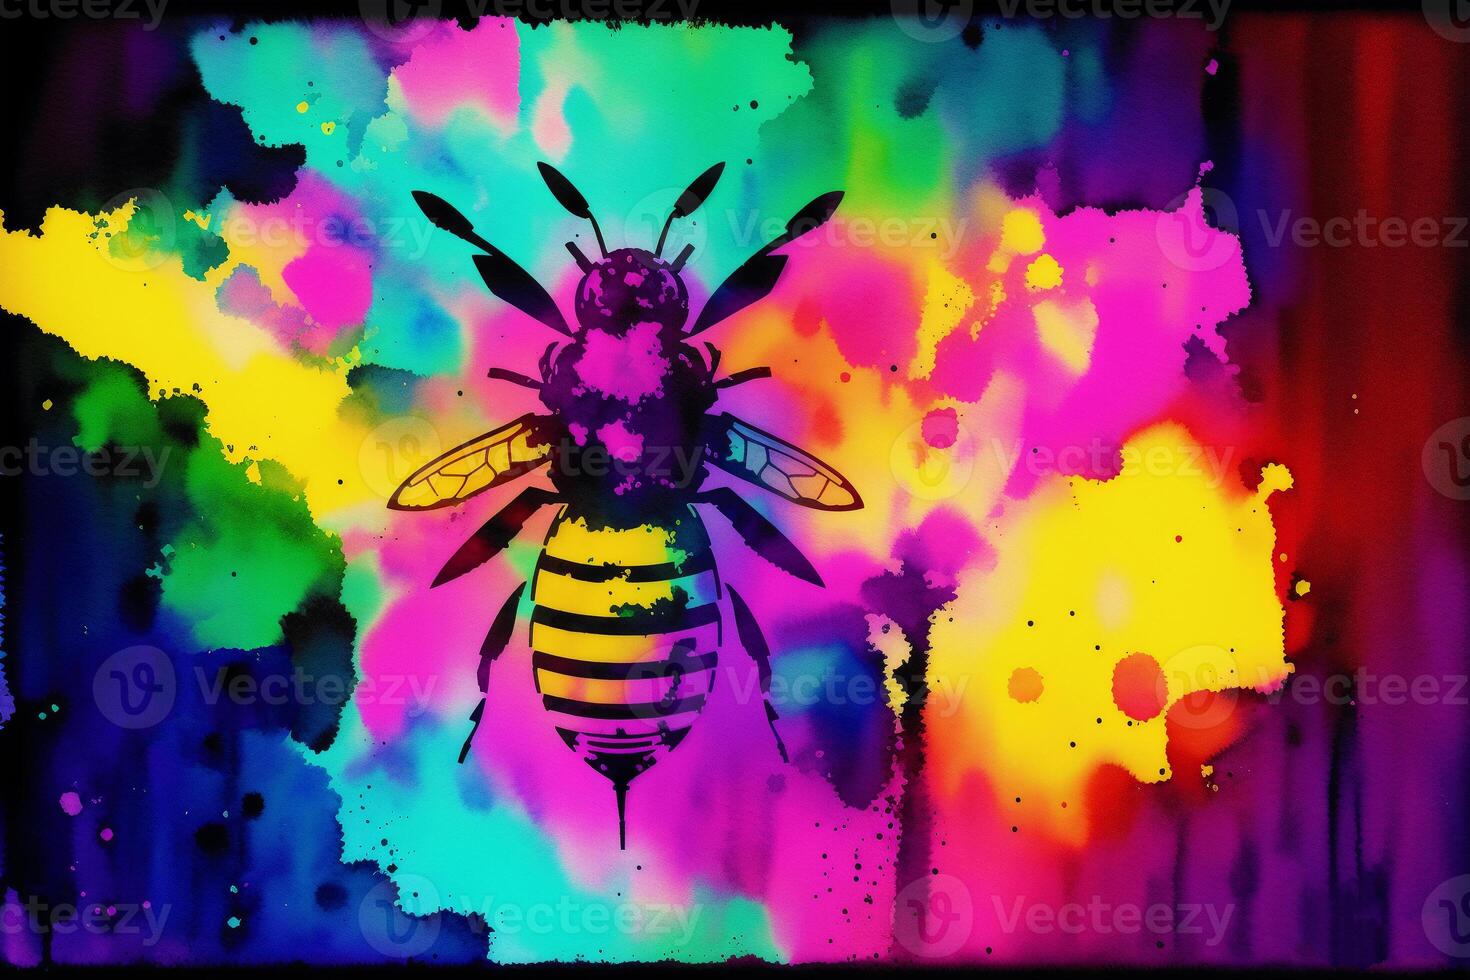 Illustration of a bee on a colorful background with flowers and blots. Digital art, photo